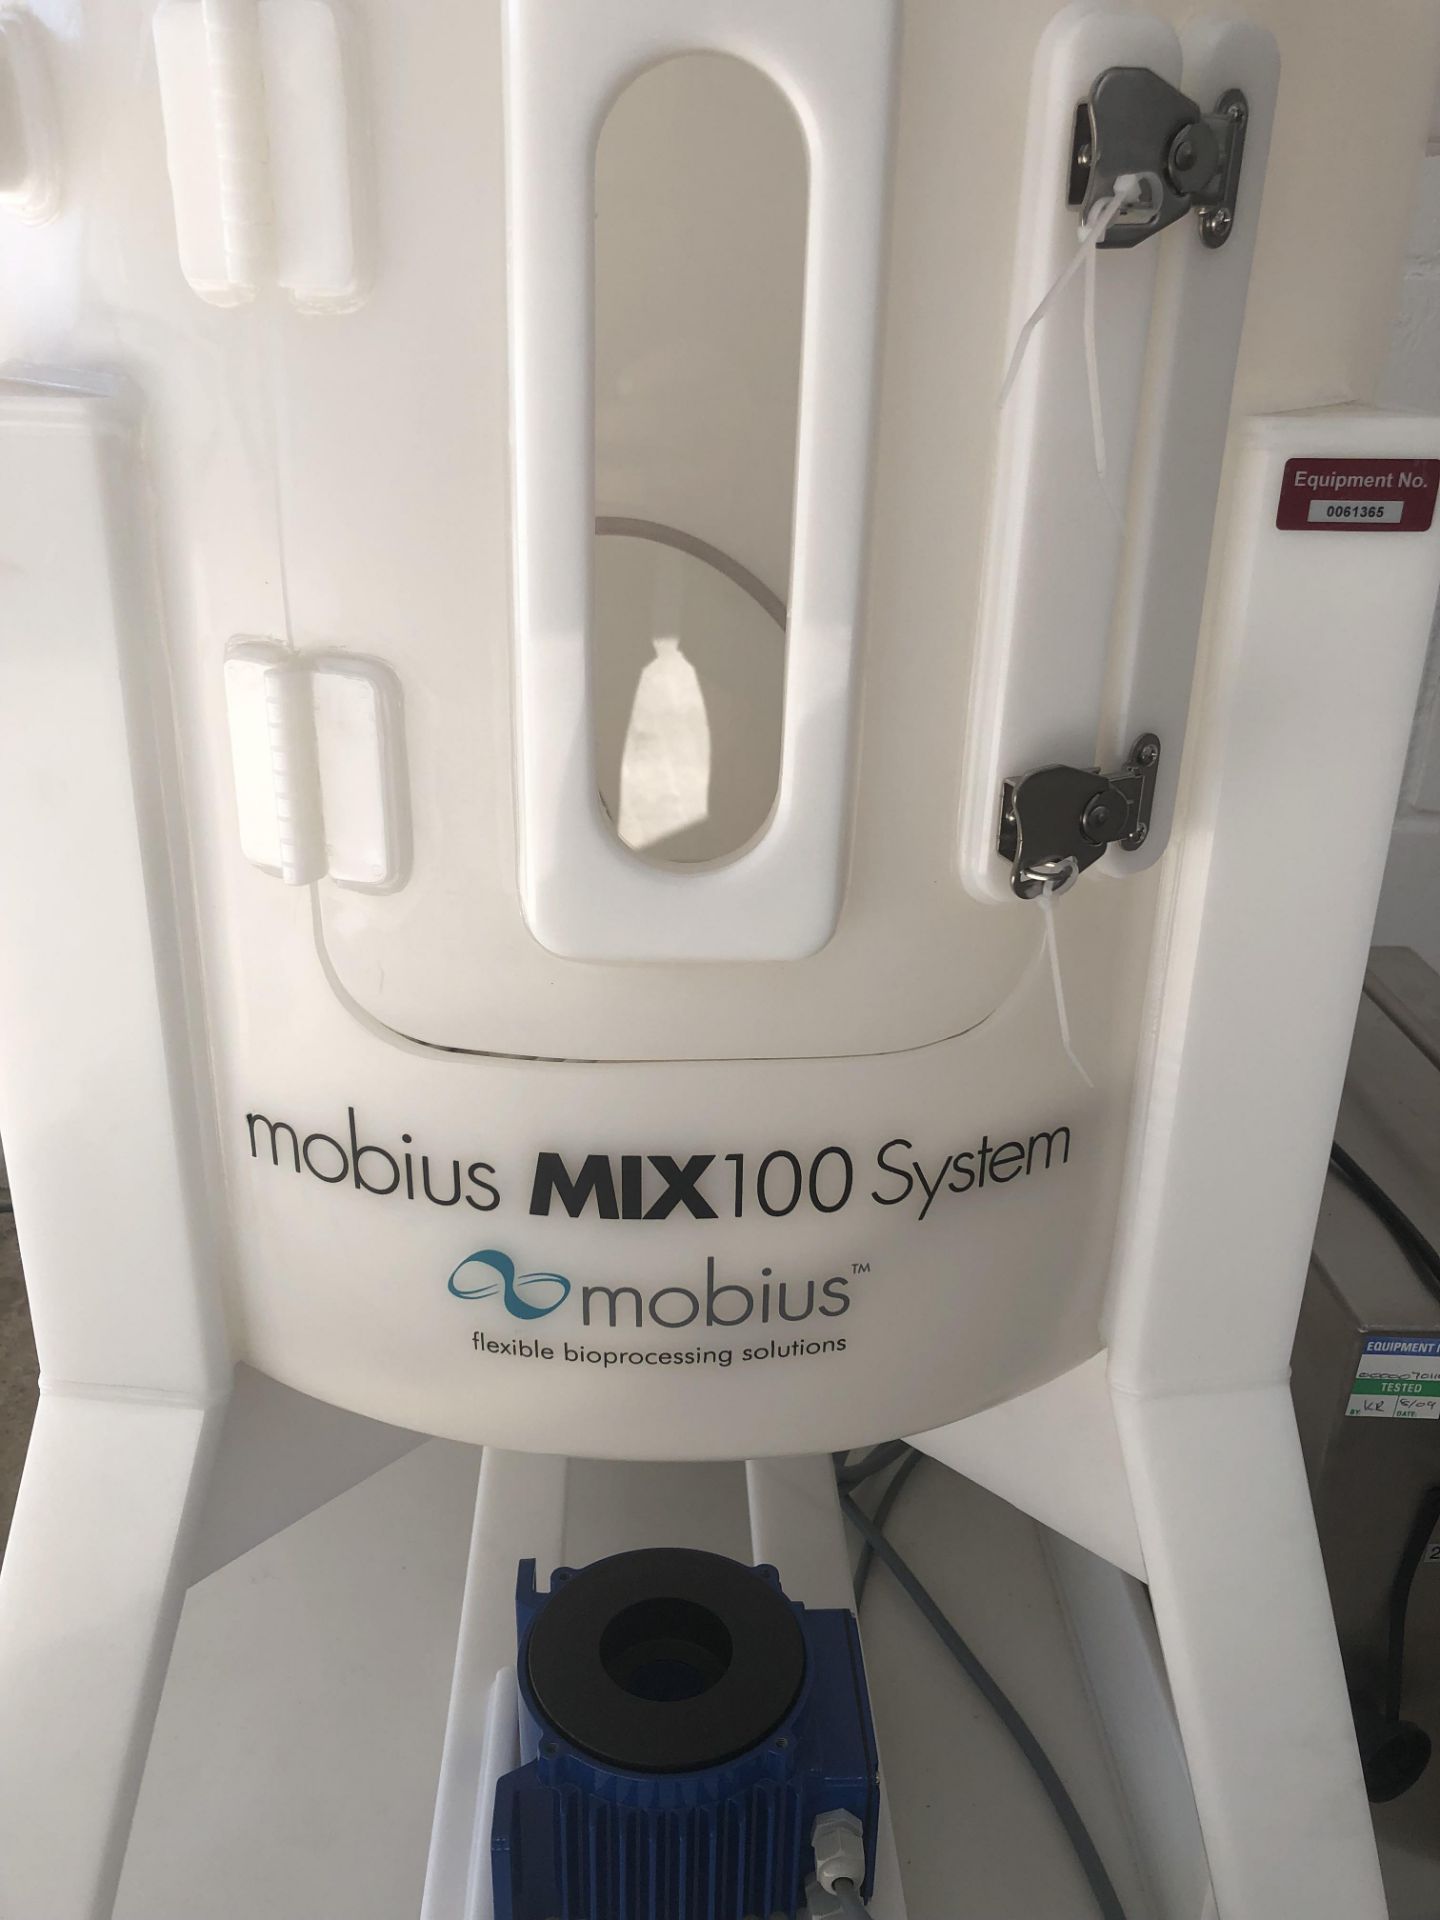 Millipore Mobius Mix 100 System *00-8550* - Image 4 of 7